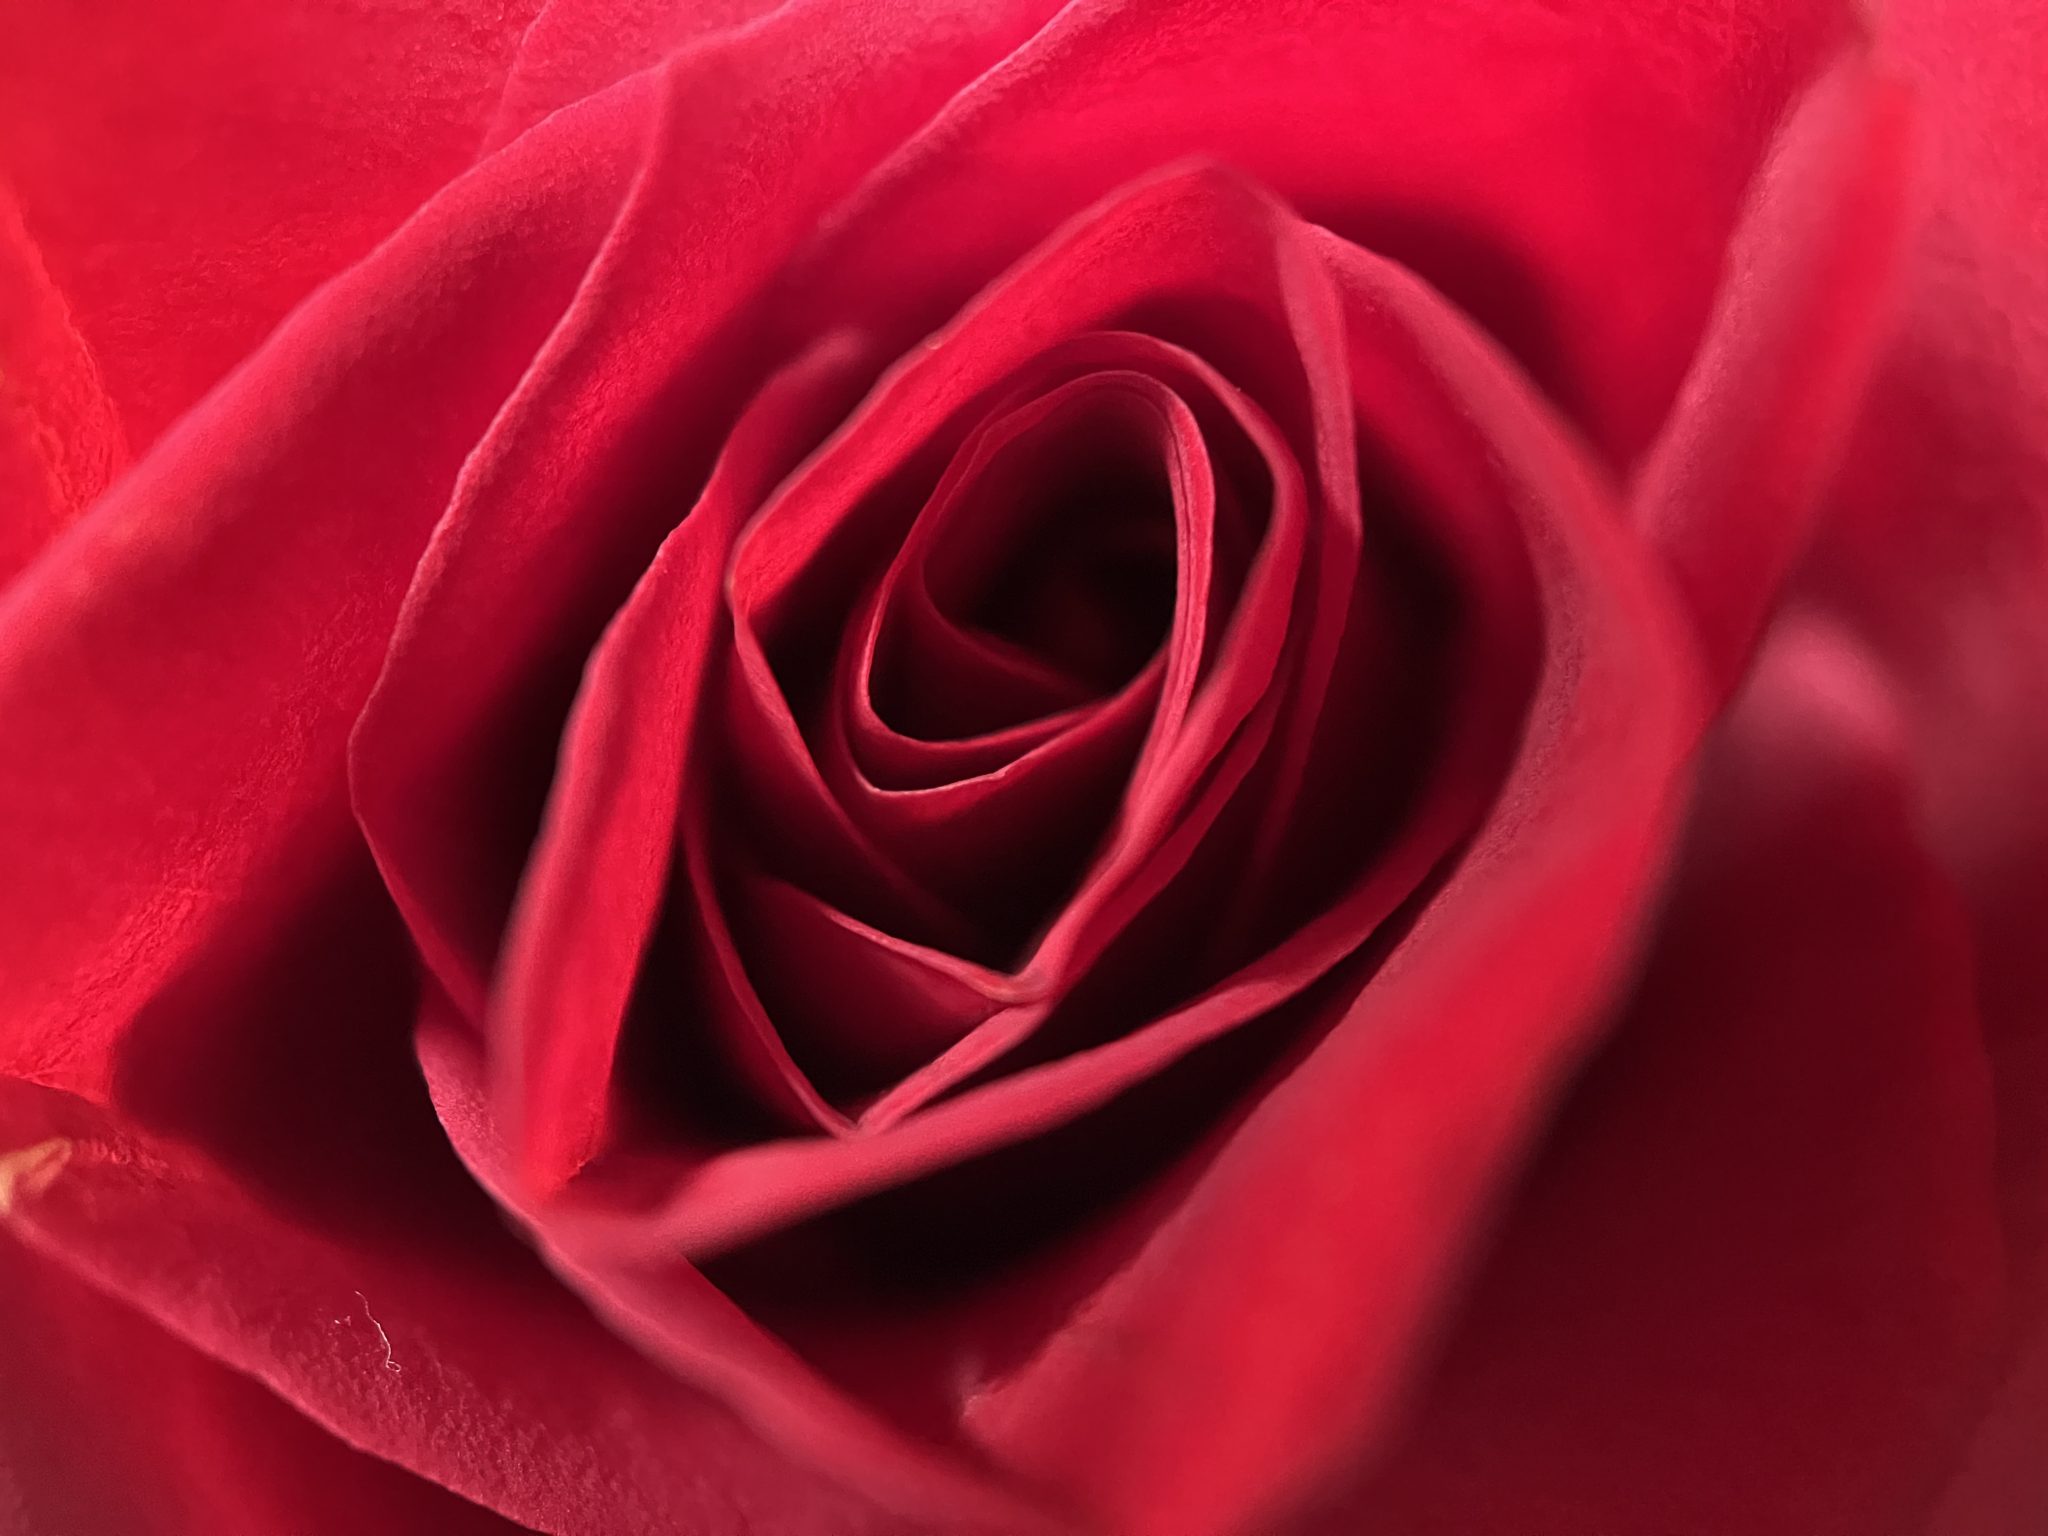 Heart of a red rose